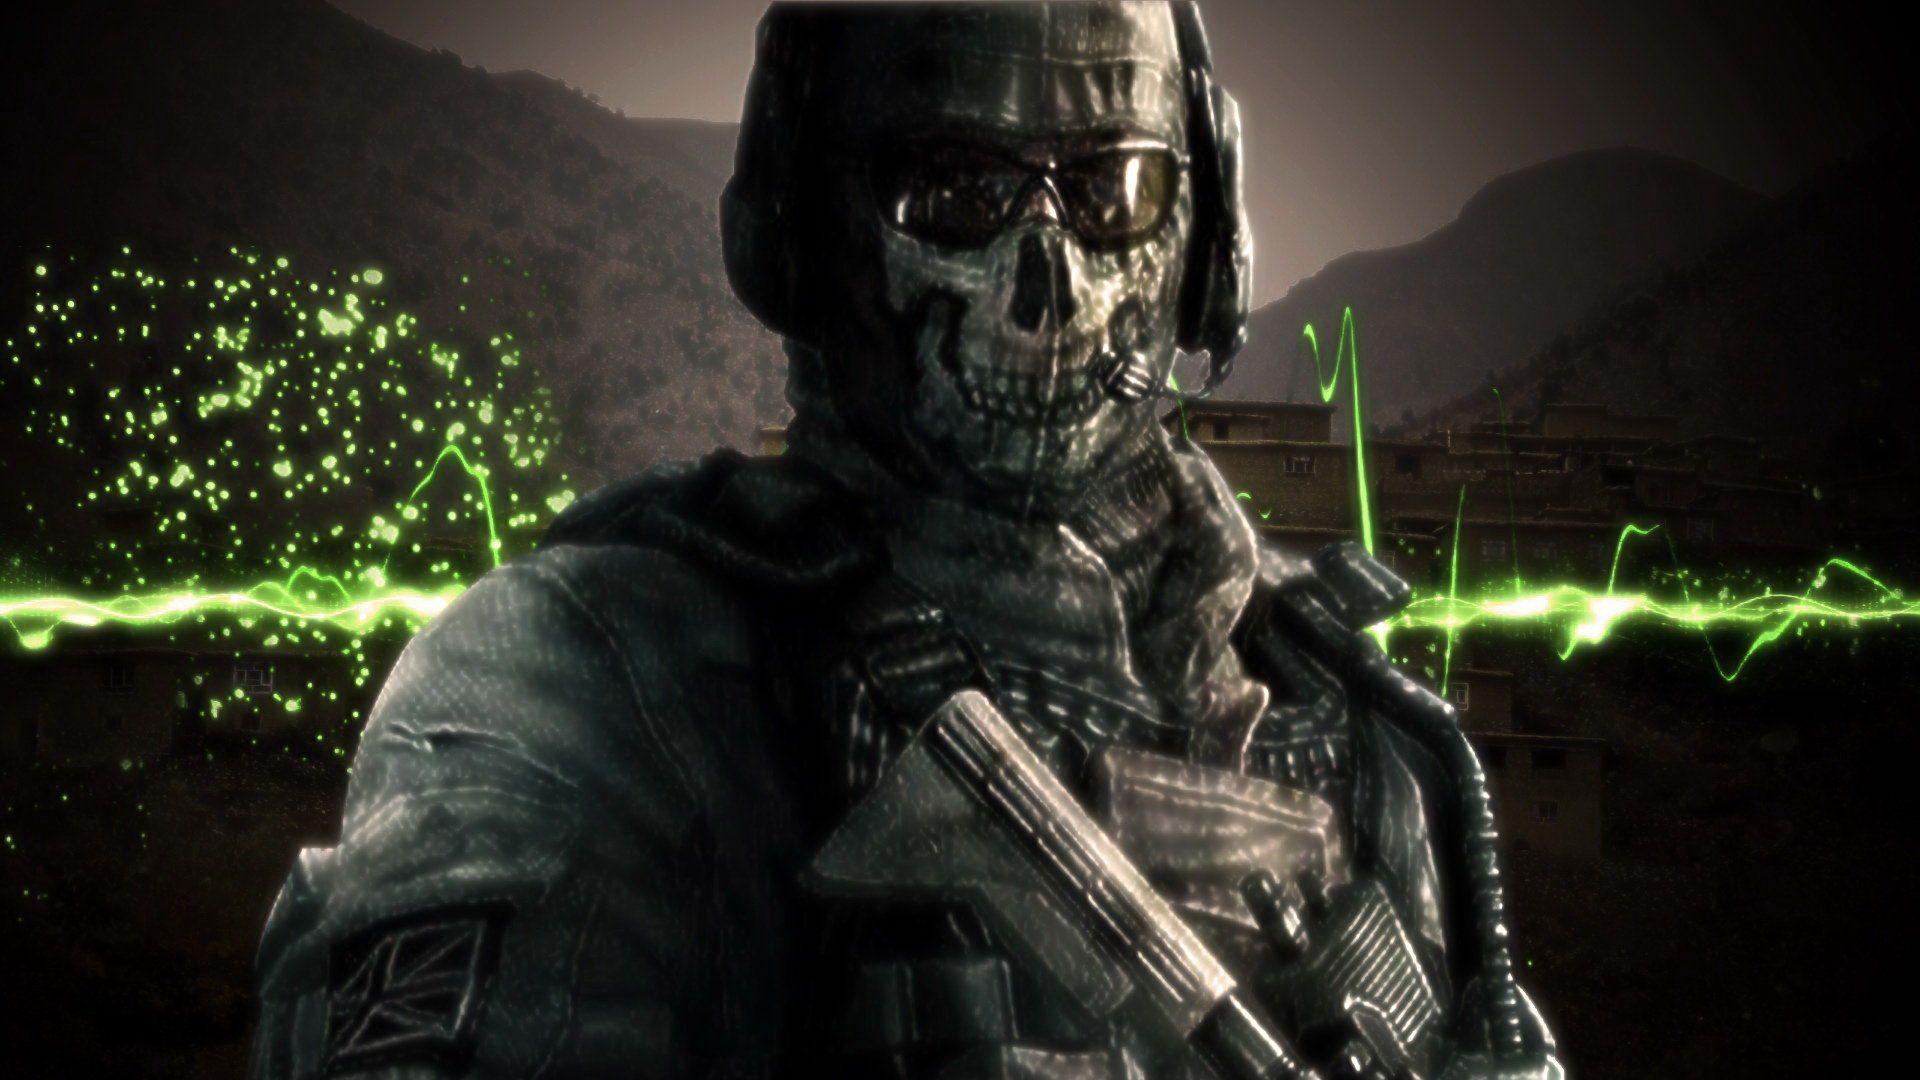 Call Of Duty Ghost Wallpaper, Call Of Duty Ghost Wallpaper. Call